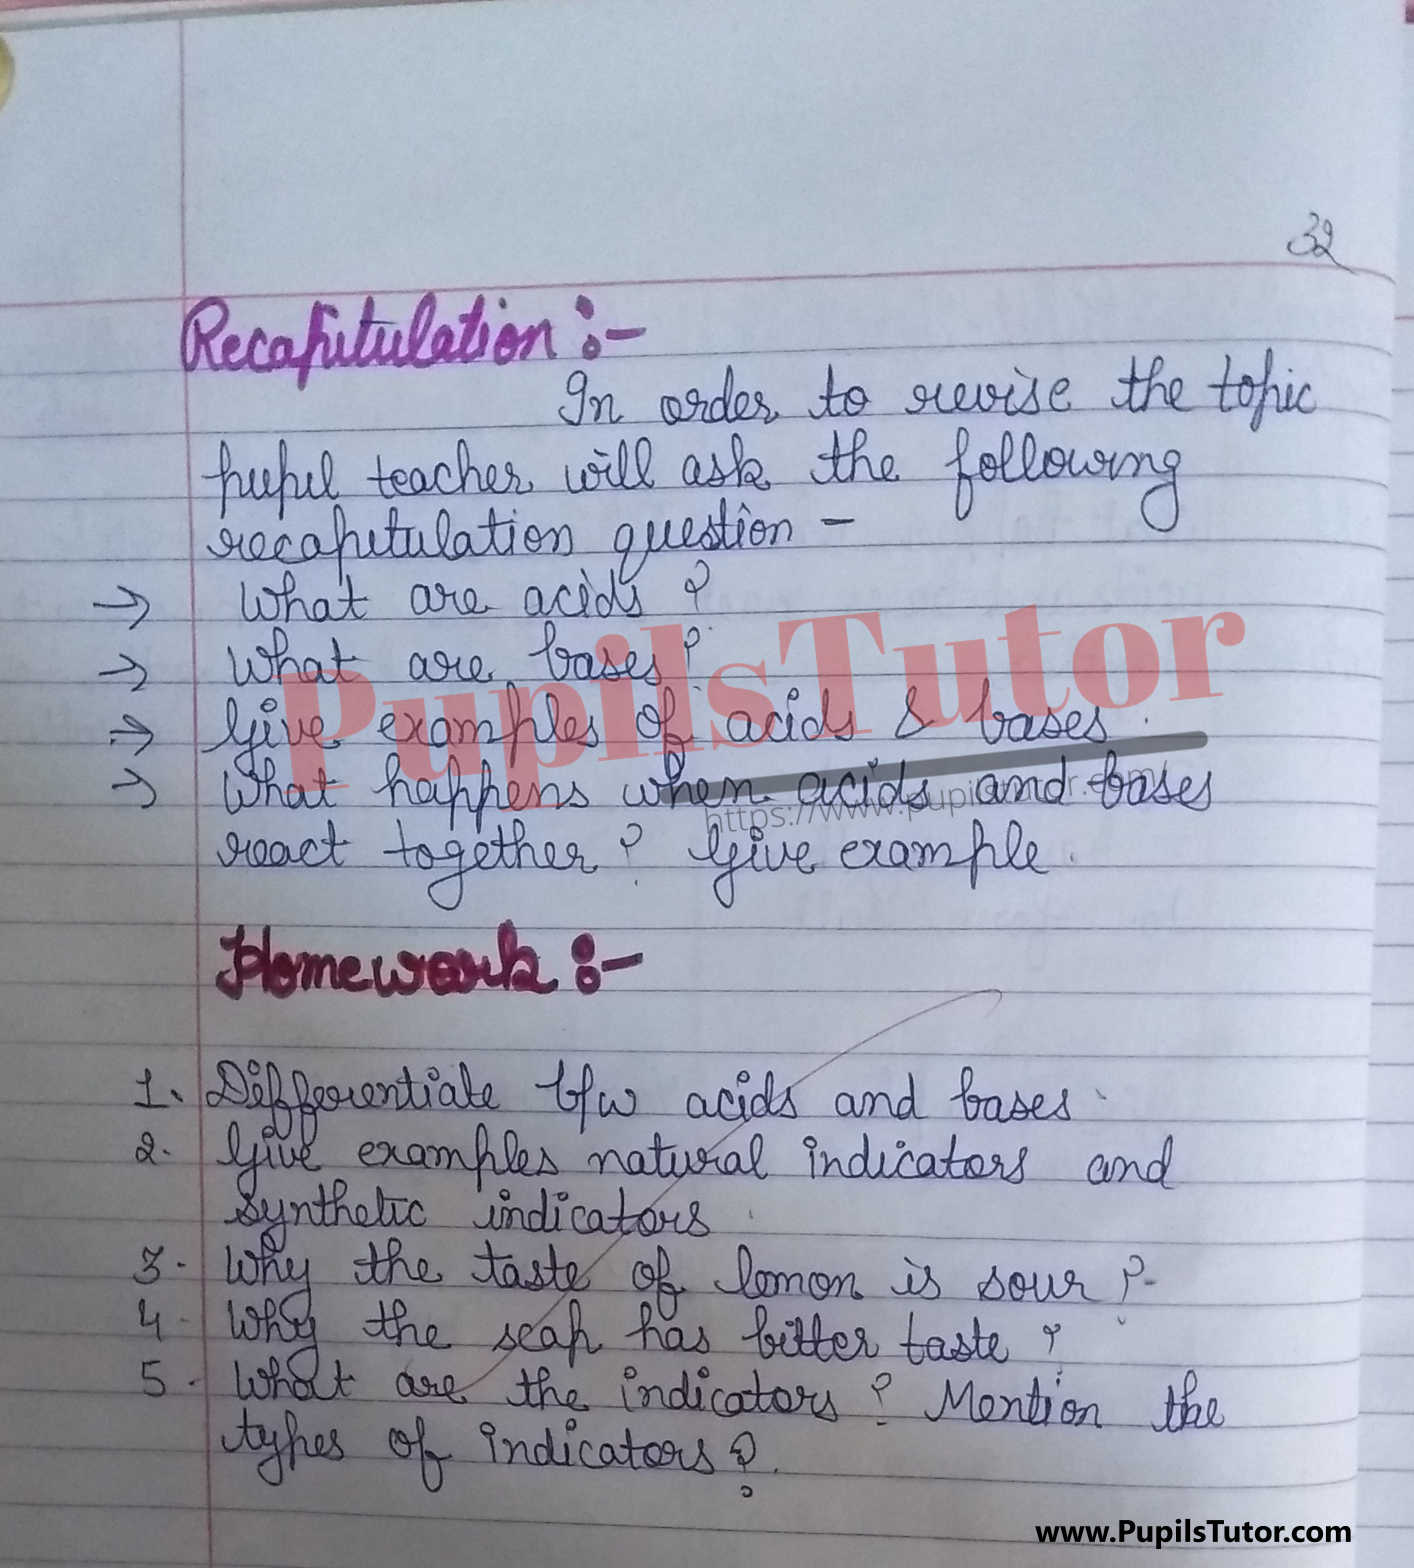 How To Make Mega Teaching Acid And Base Lesson Plan For Chemistry (Science) Subject In English [Page And Image Number 7] – www.pupilstutor.com